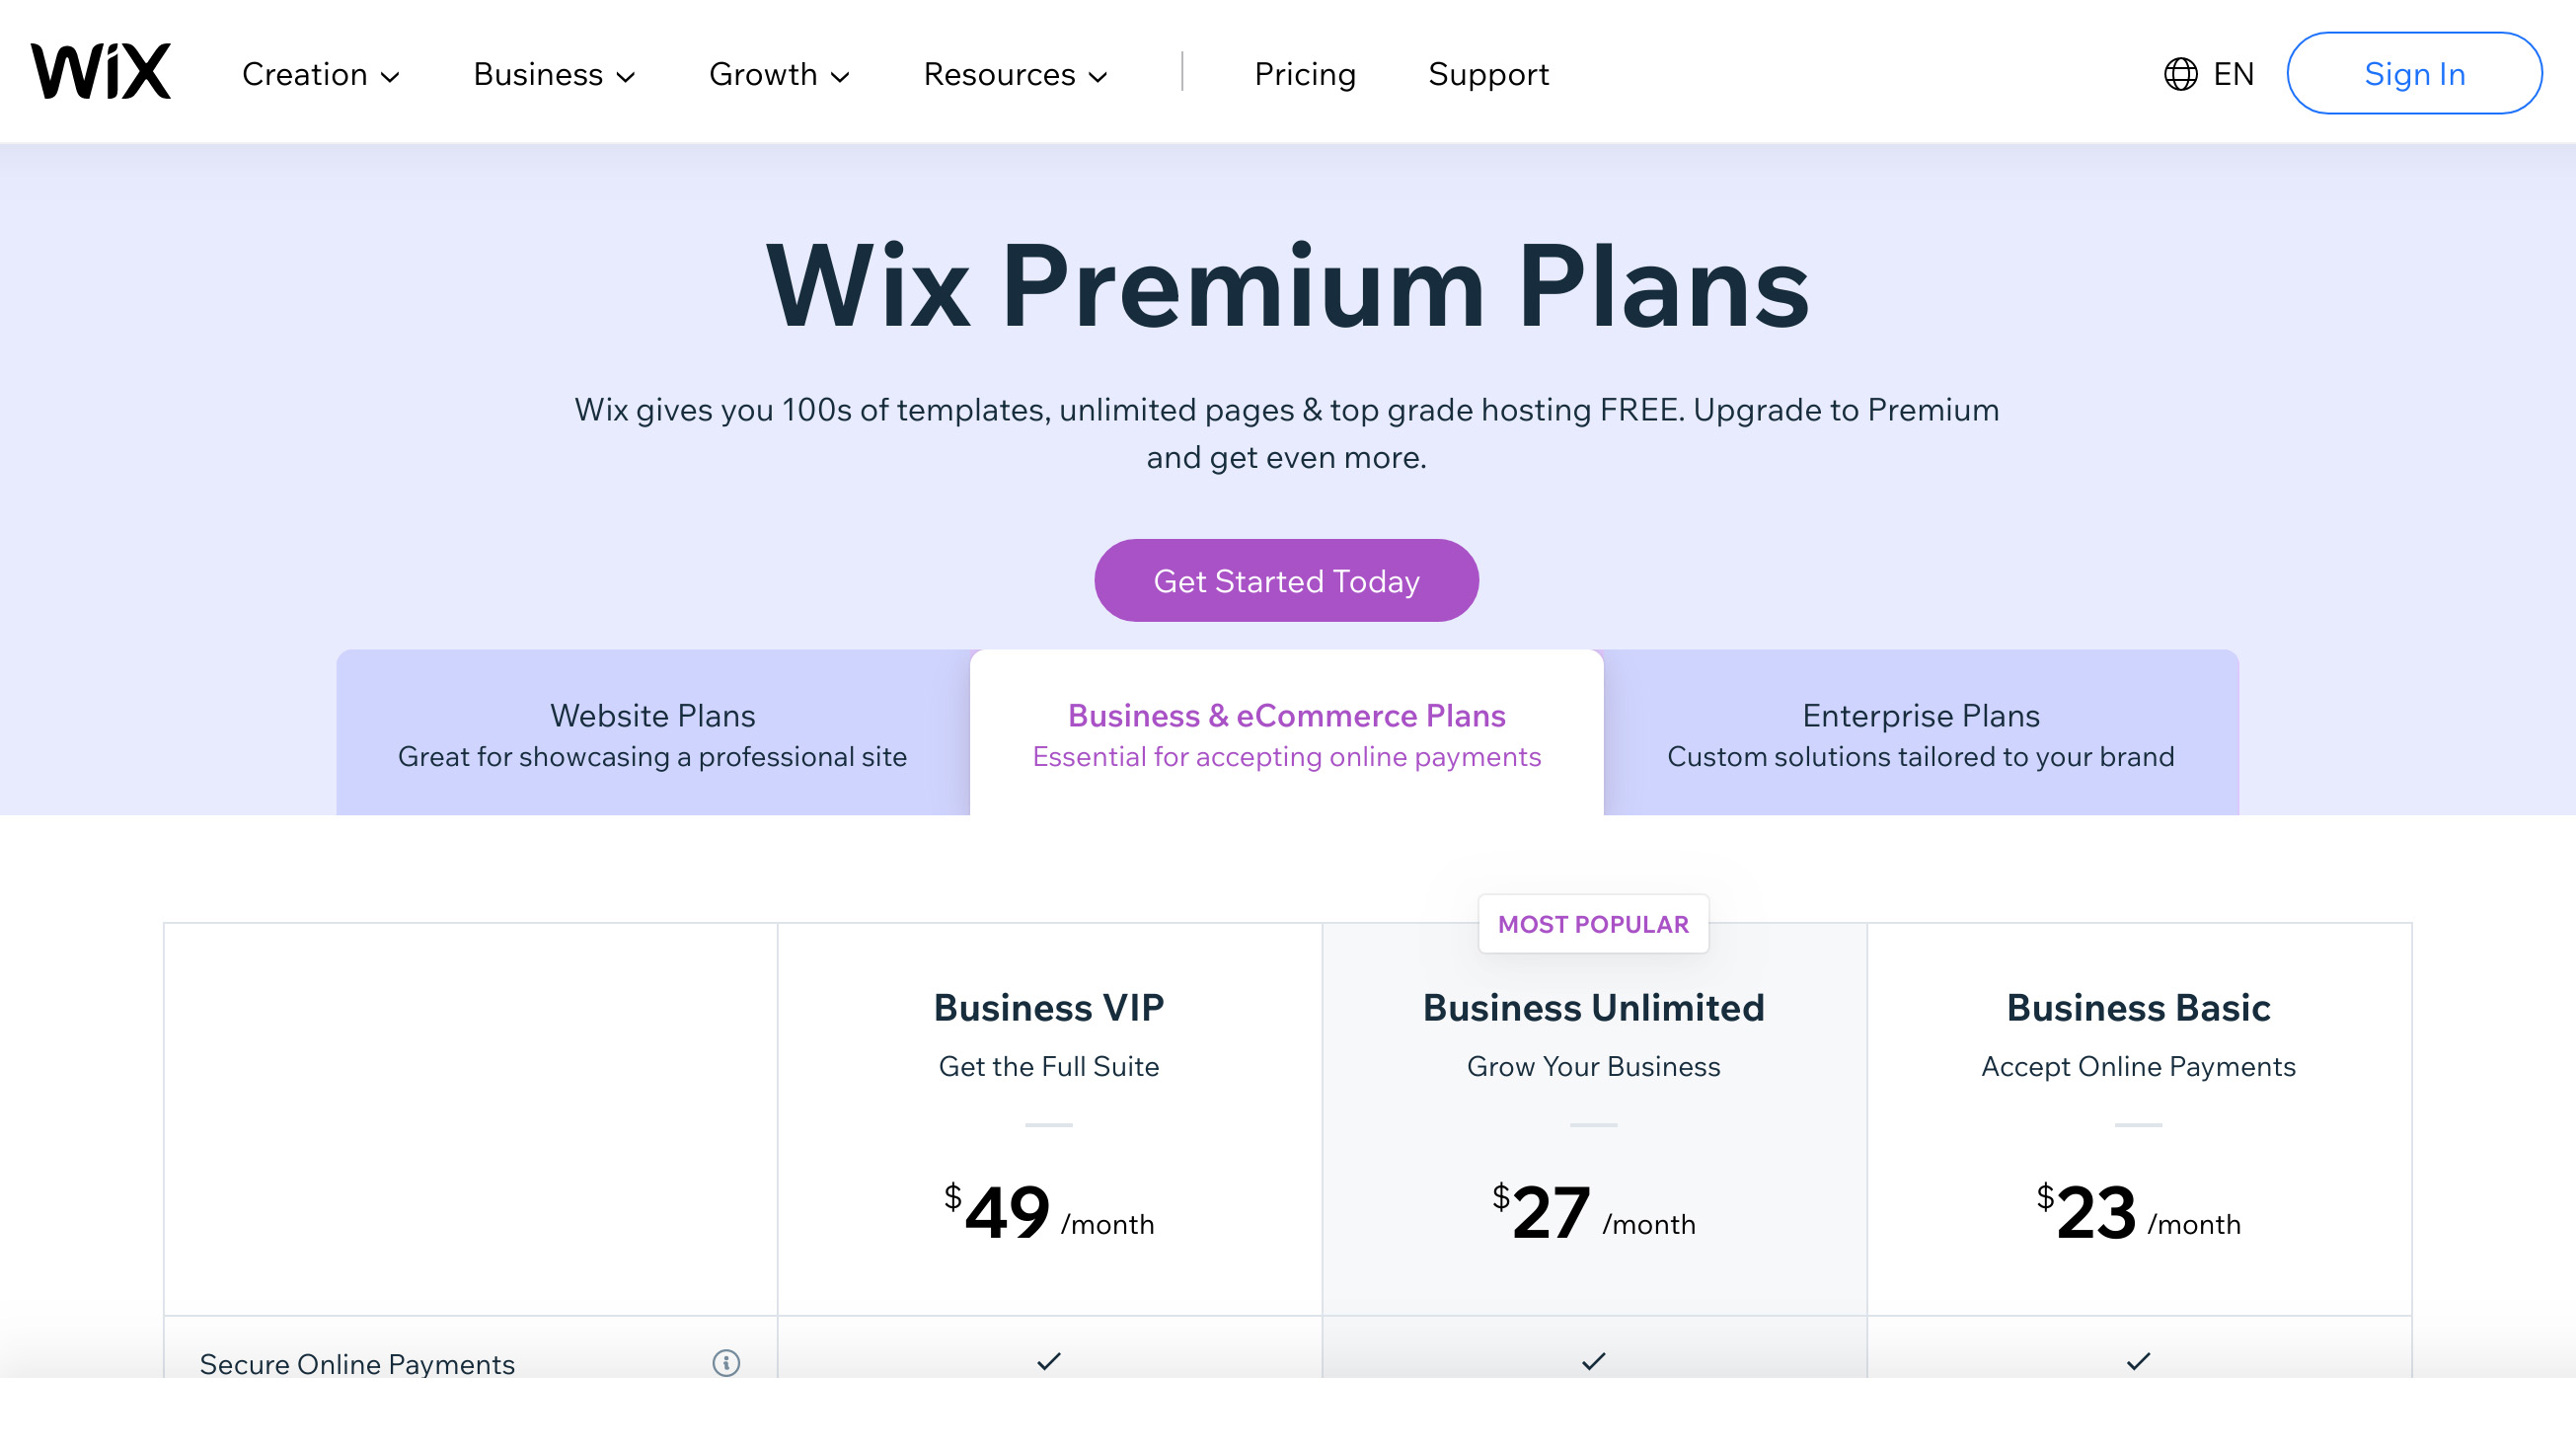 Wix POS subscription plans and pricing listed on Wix website